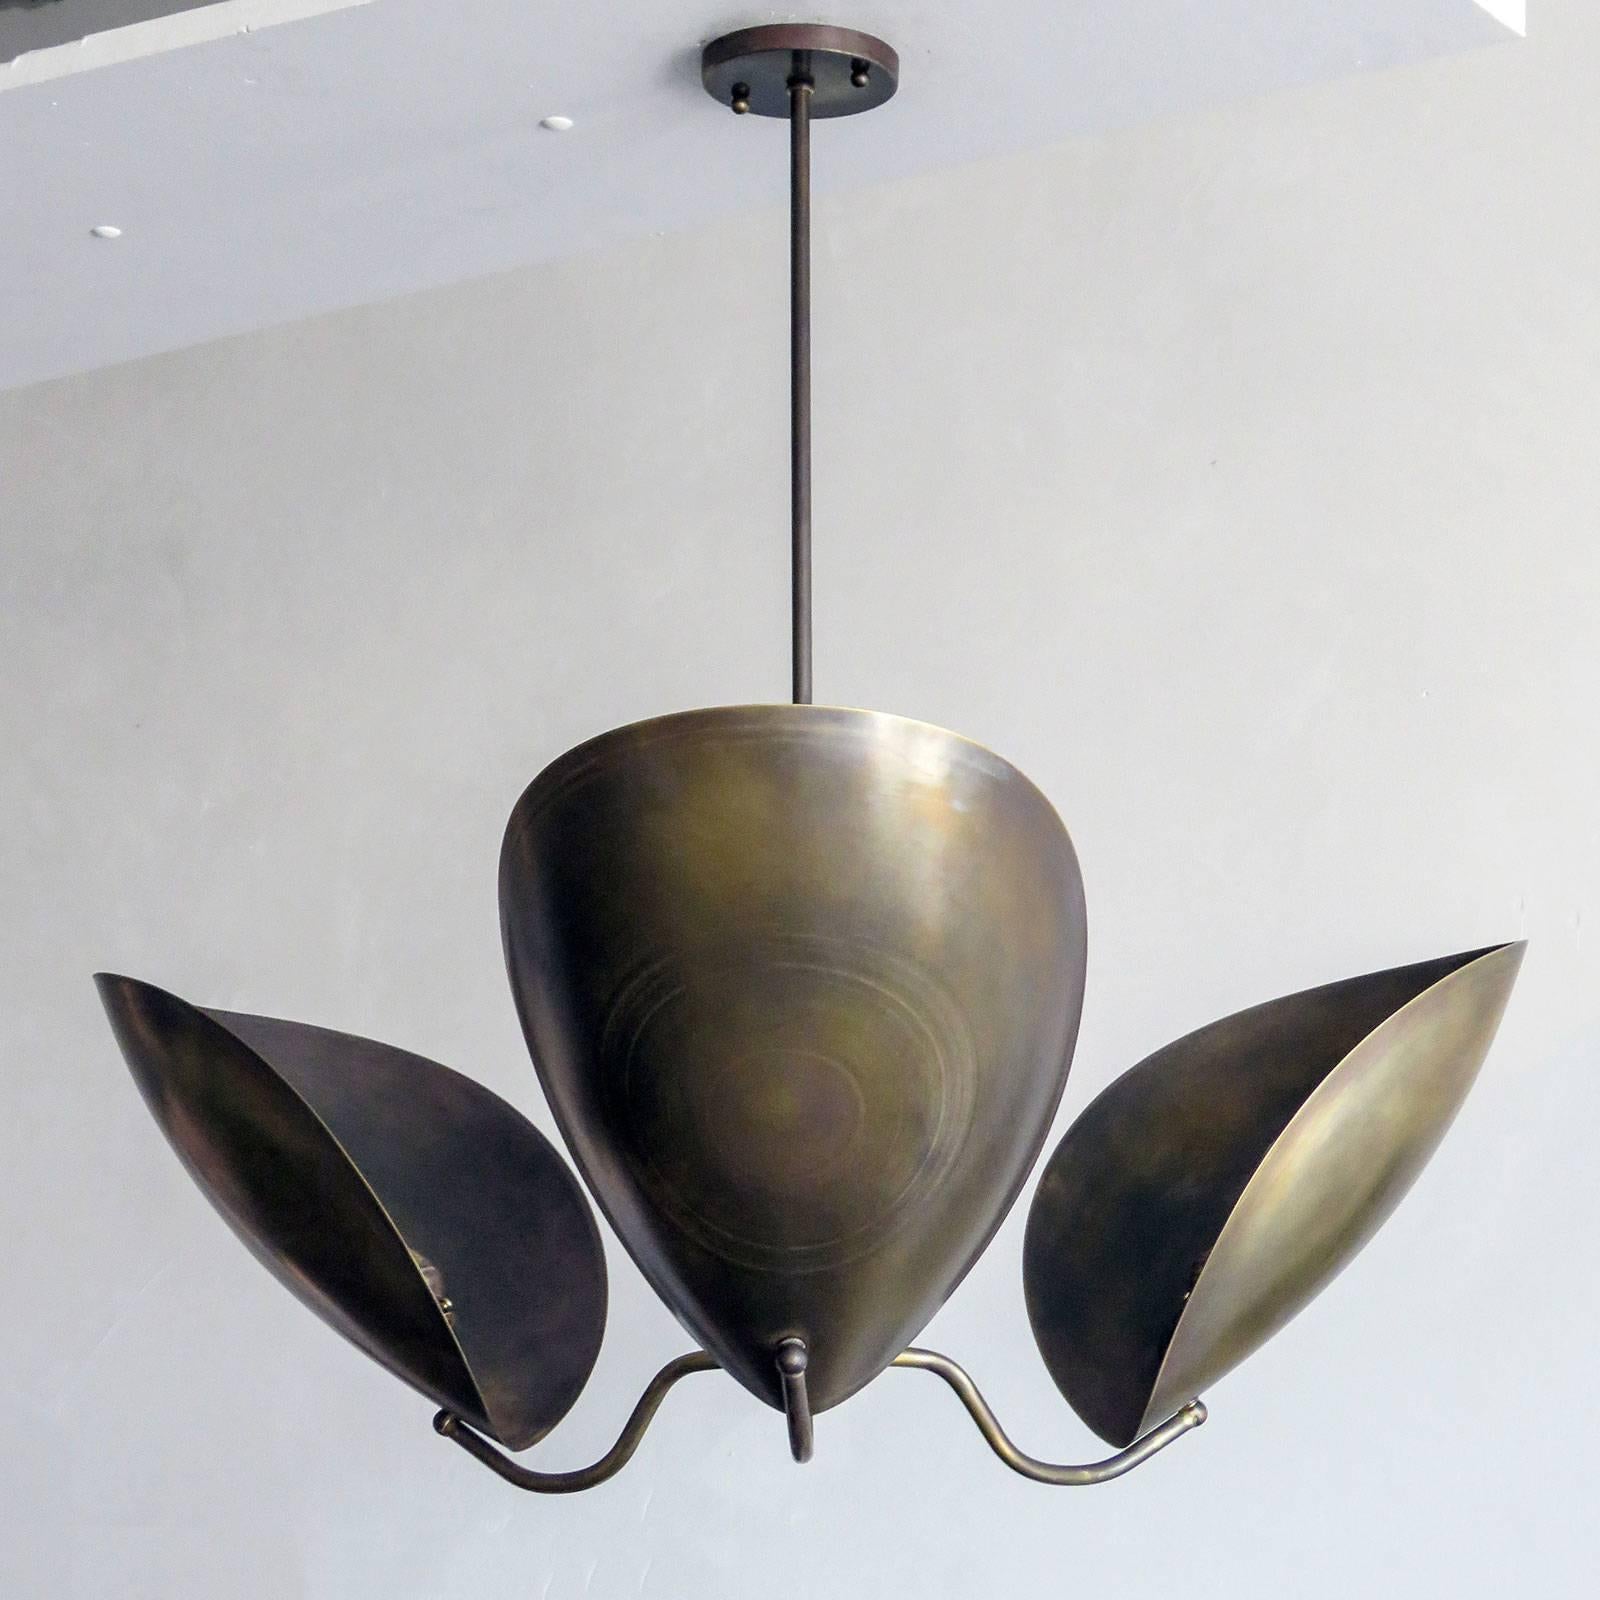 Elegant three shield chandelier 'Chiton-3' designed by Gallery L7, handcrafted and finished in Los Angeles from American brass. Reminiscent of stag beetle armor, in a raw brass finish, overall height can be customized ( 20in + ). Three E26 sockets